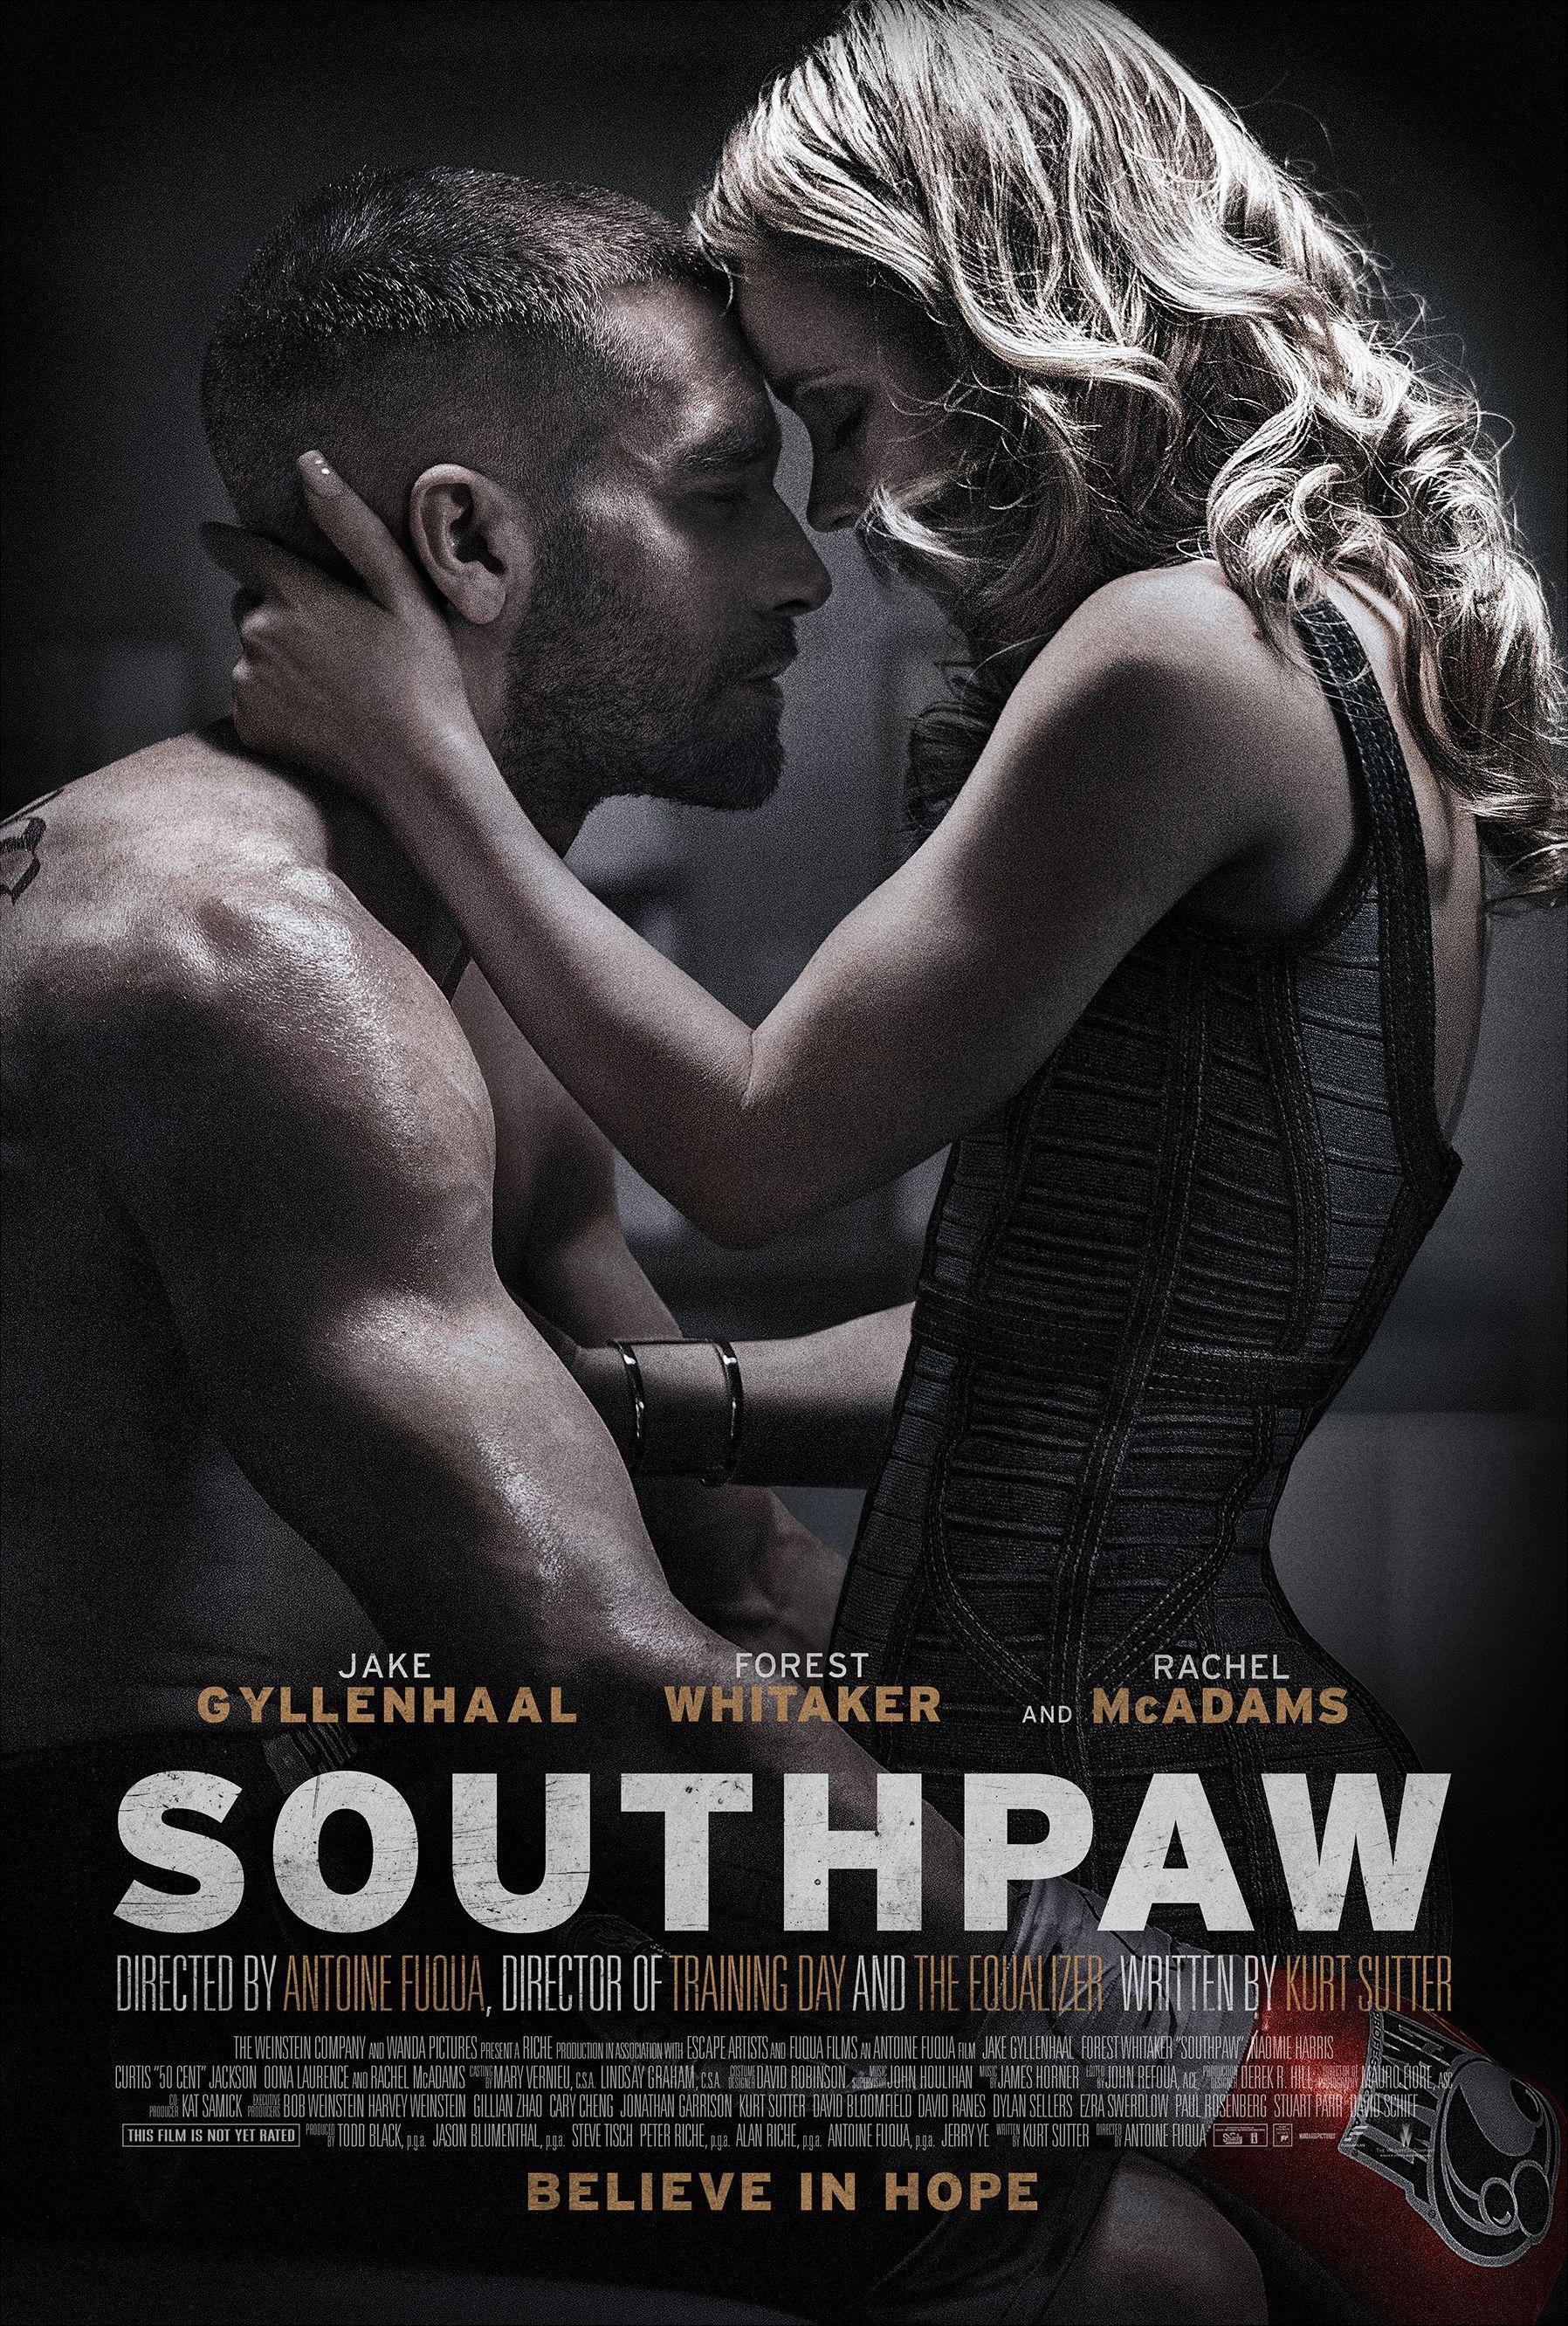 All Movie Posters and Prints for Southpaw